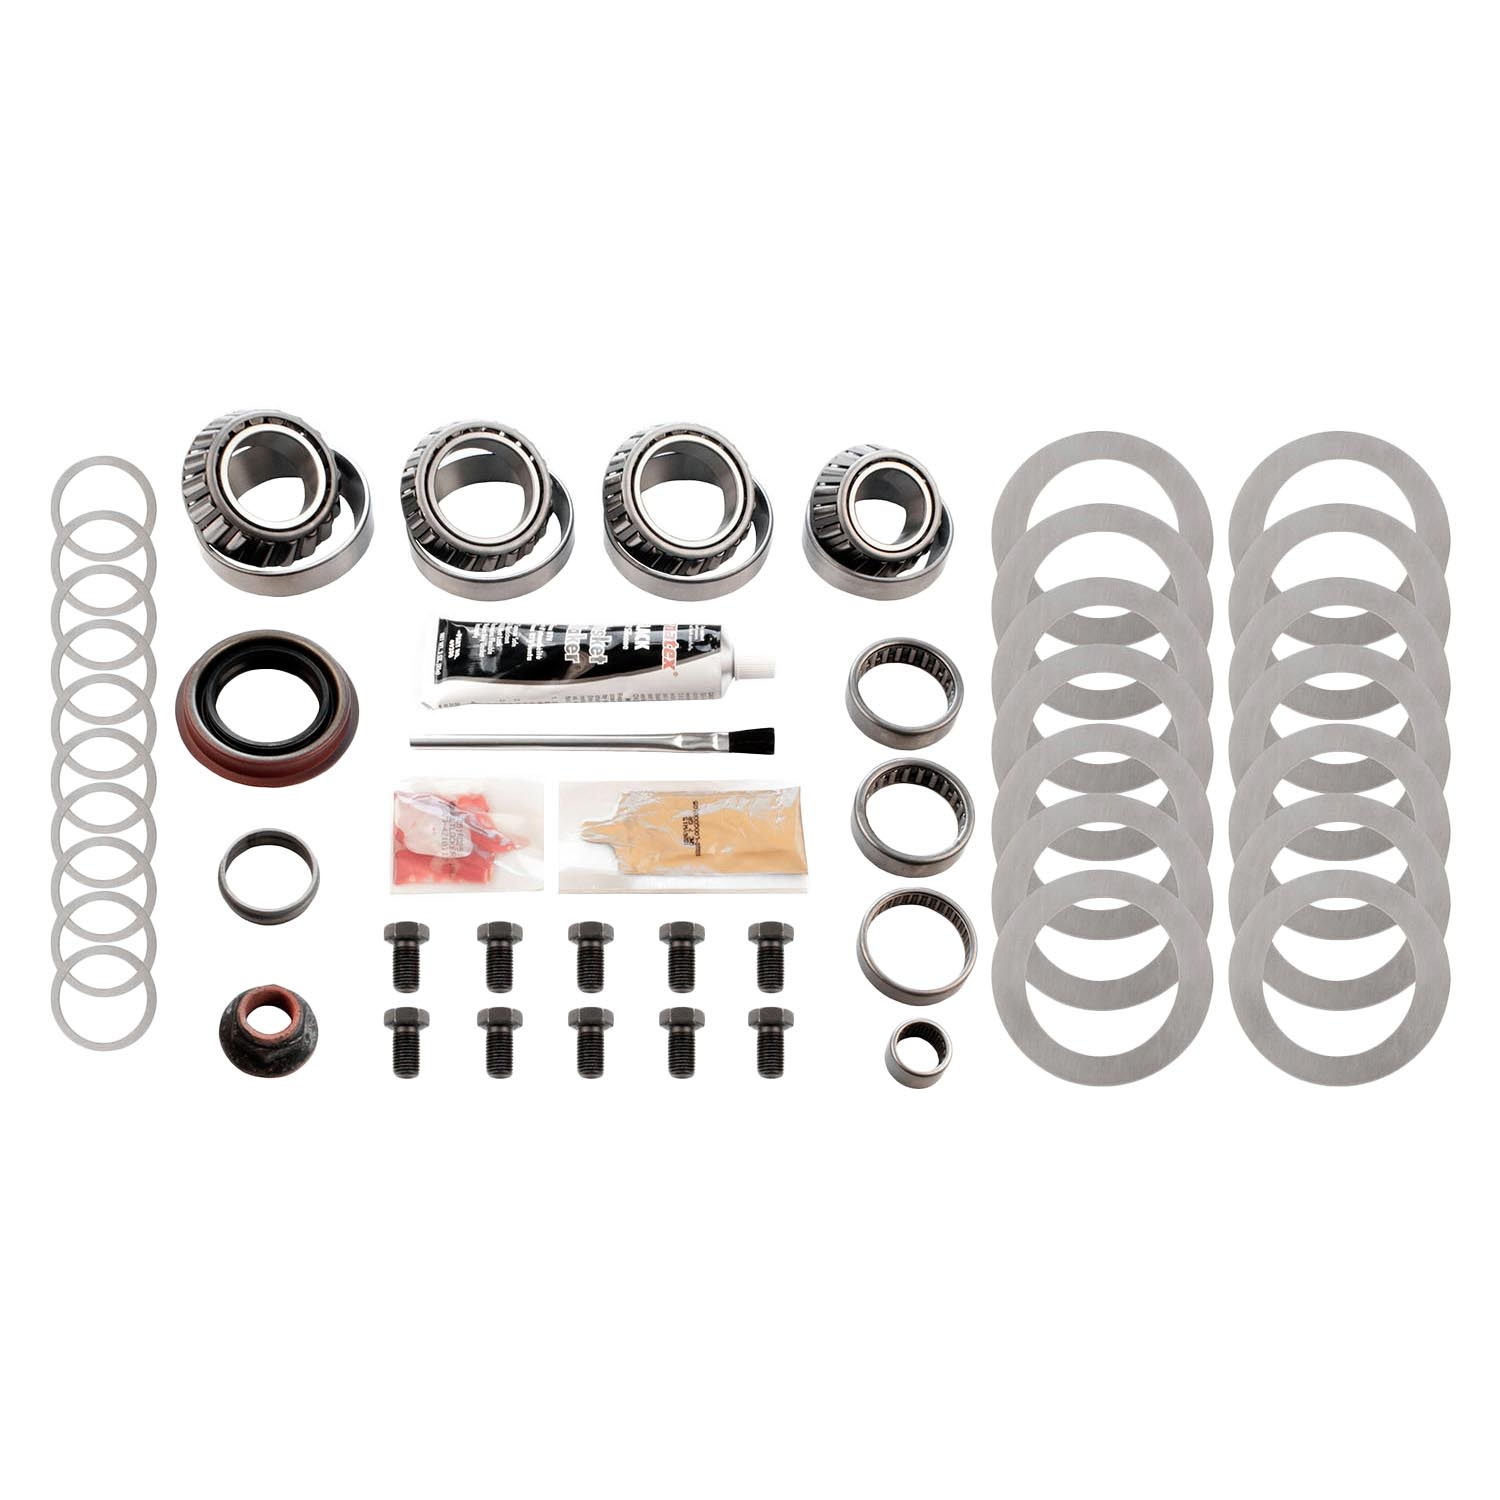 Motive Gear Differential Bearing Kits Ford 8.8 Ifs | Mk Ford 8.8 Ifs ’97-On | Differential Rebuild